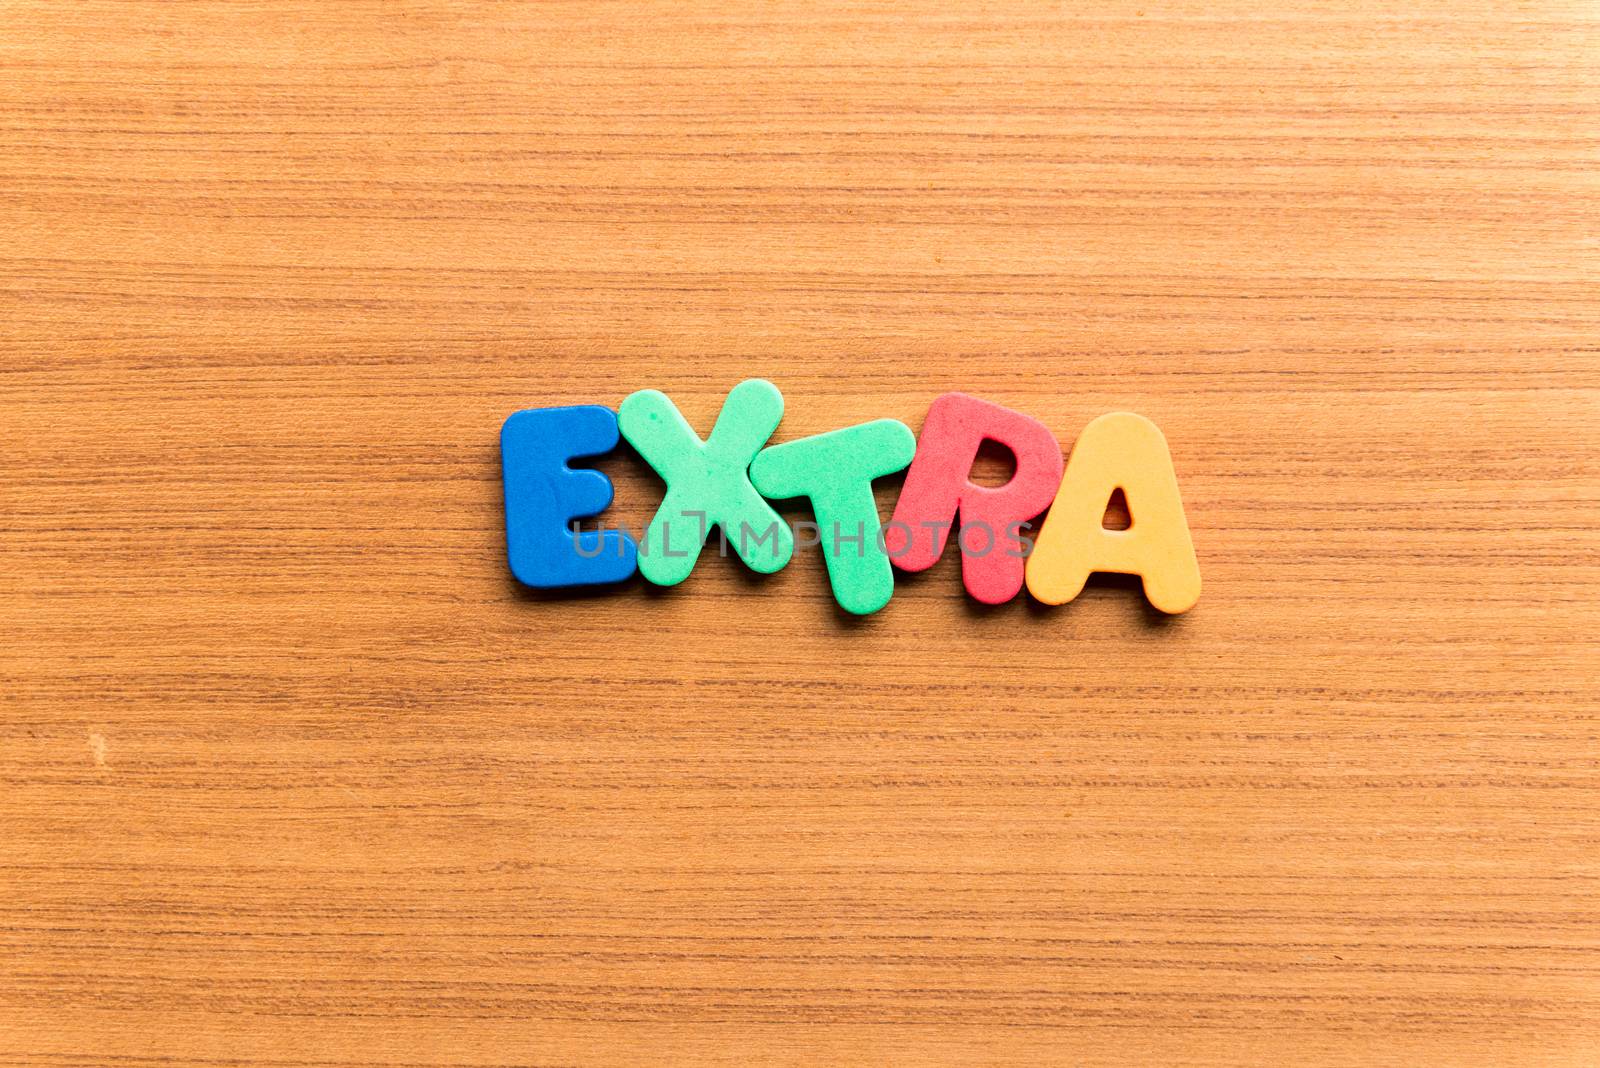 extra colorful word on the wooden background